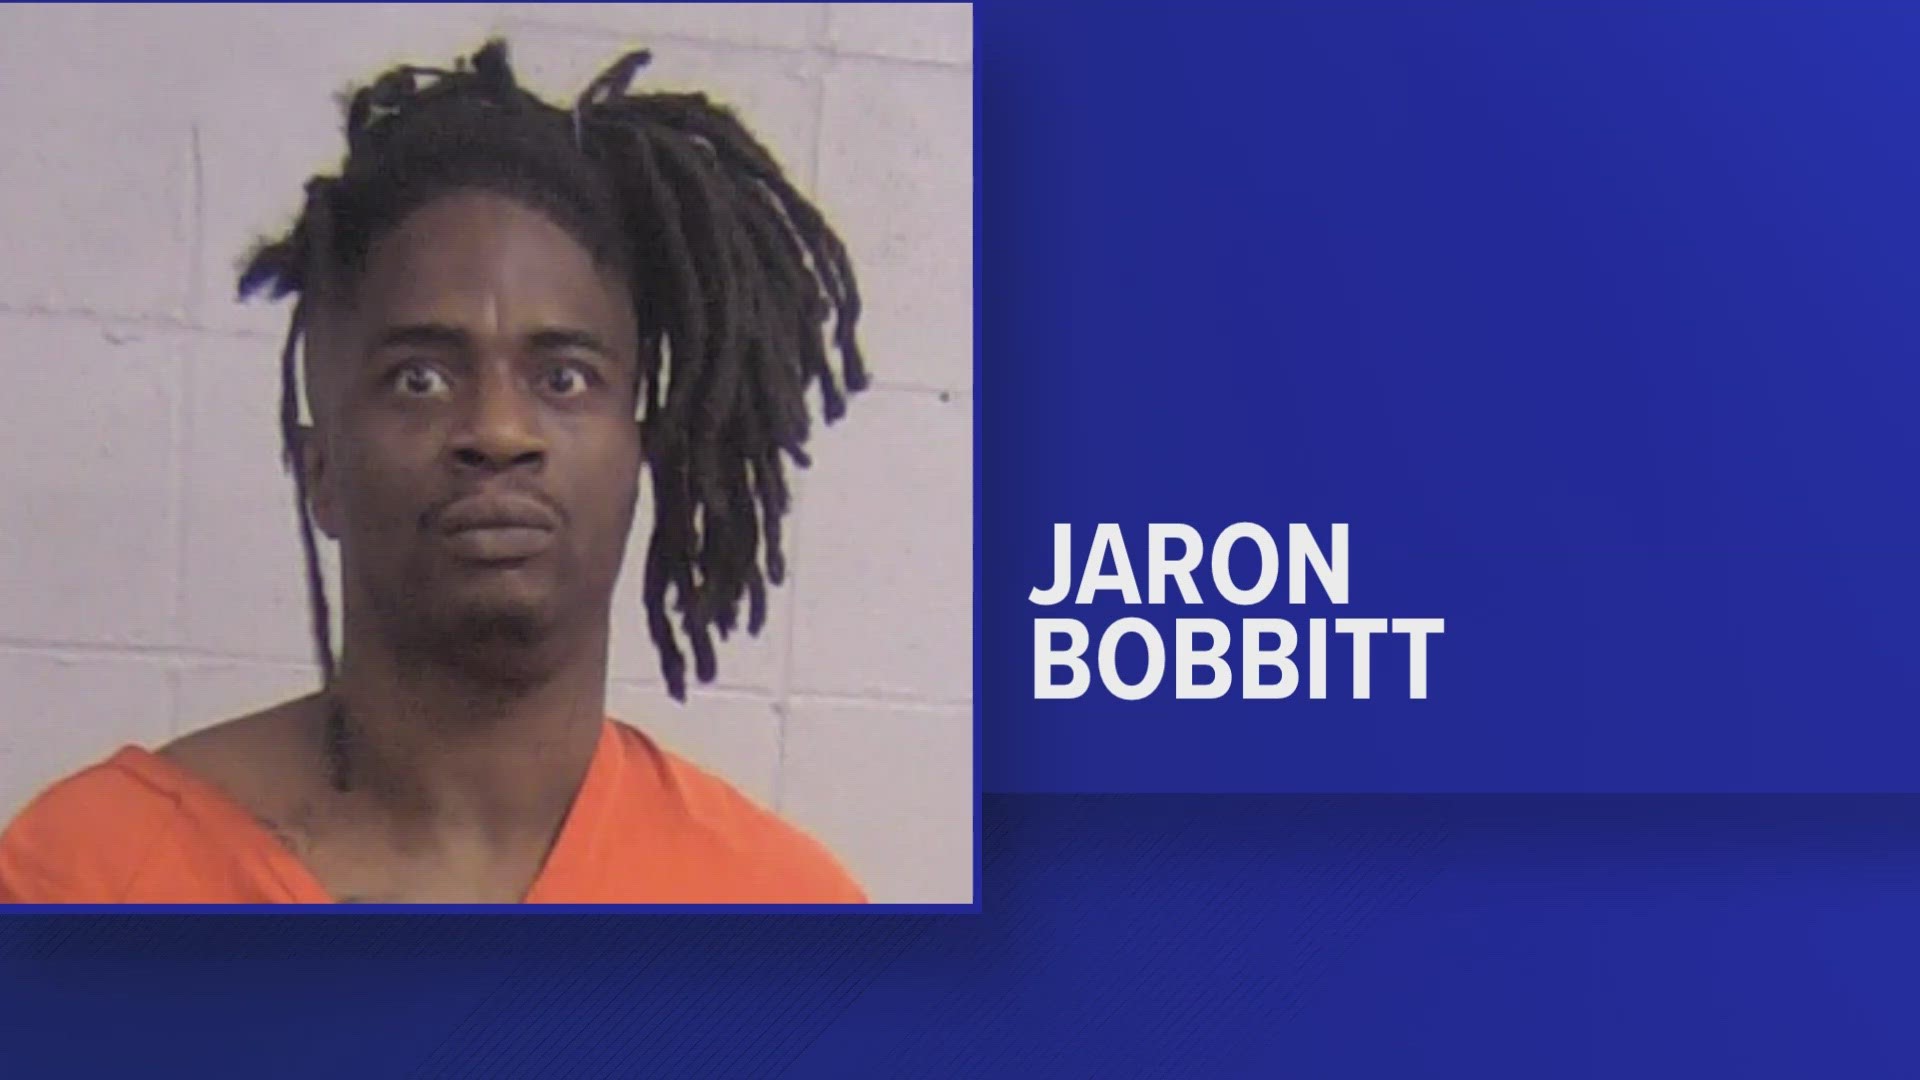 Jaron Bobbitt, 38, is facing charges including wanton endangerment of a police officer and assault.